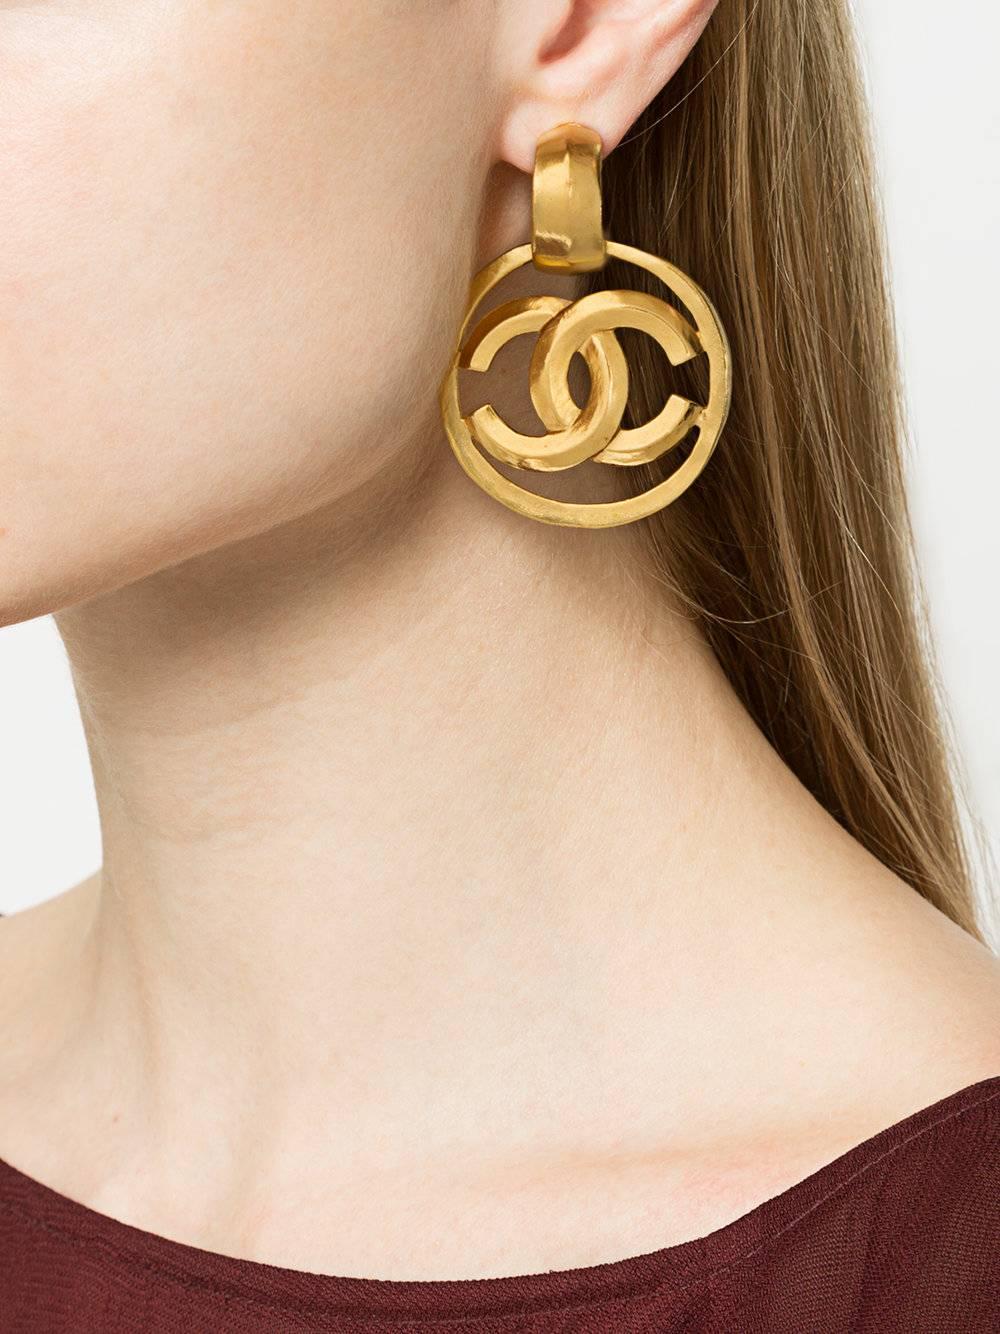 Chanel CC Gold Charm Round Circle Hoop Doorknocker Large Dangle Earrings in Box

Metal
Gold tone
Clip on closure 
Made in France
Width 1.5